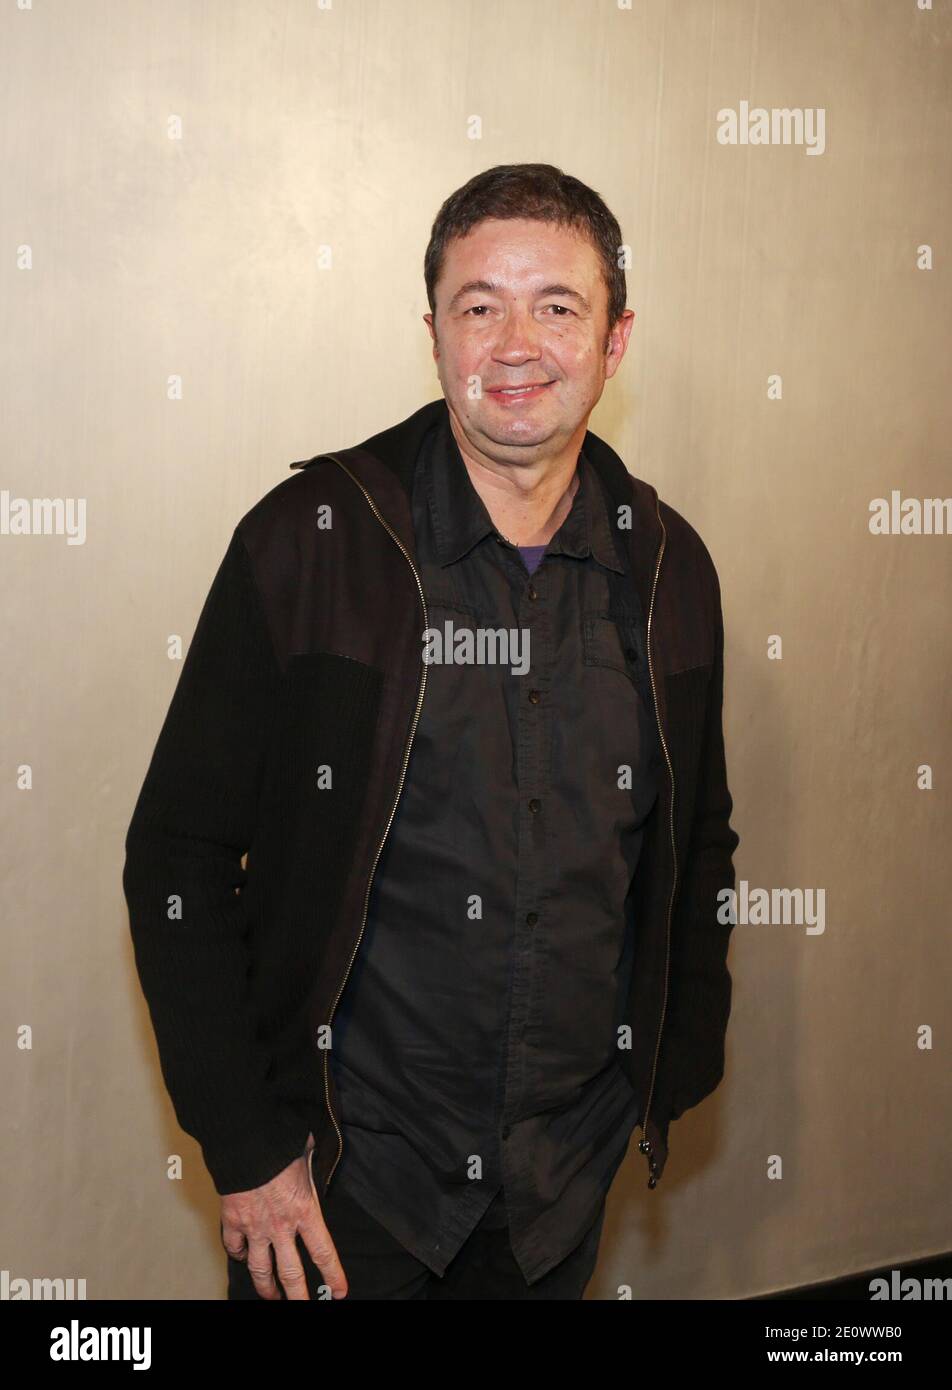 Frederic Bouraly attending the 19th Prix du Producteur Francais de Television (French TV Producer Awards) held at Pavillon Cambon in Paris, France on December 10,2012. Photo by Denis Guignebourg/ABACAPRESS.COM Stock Photo